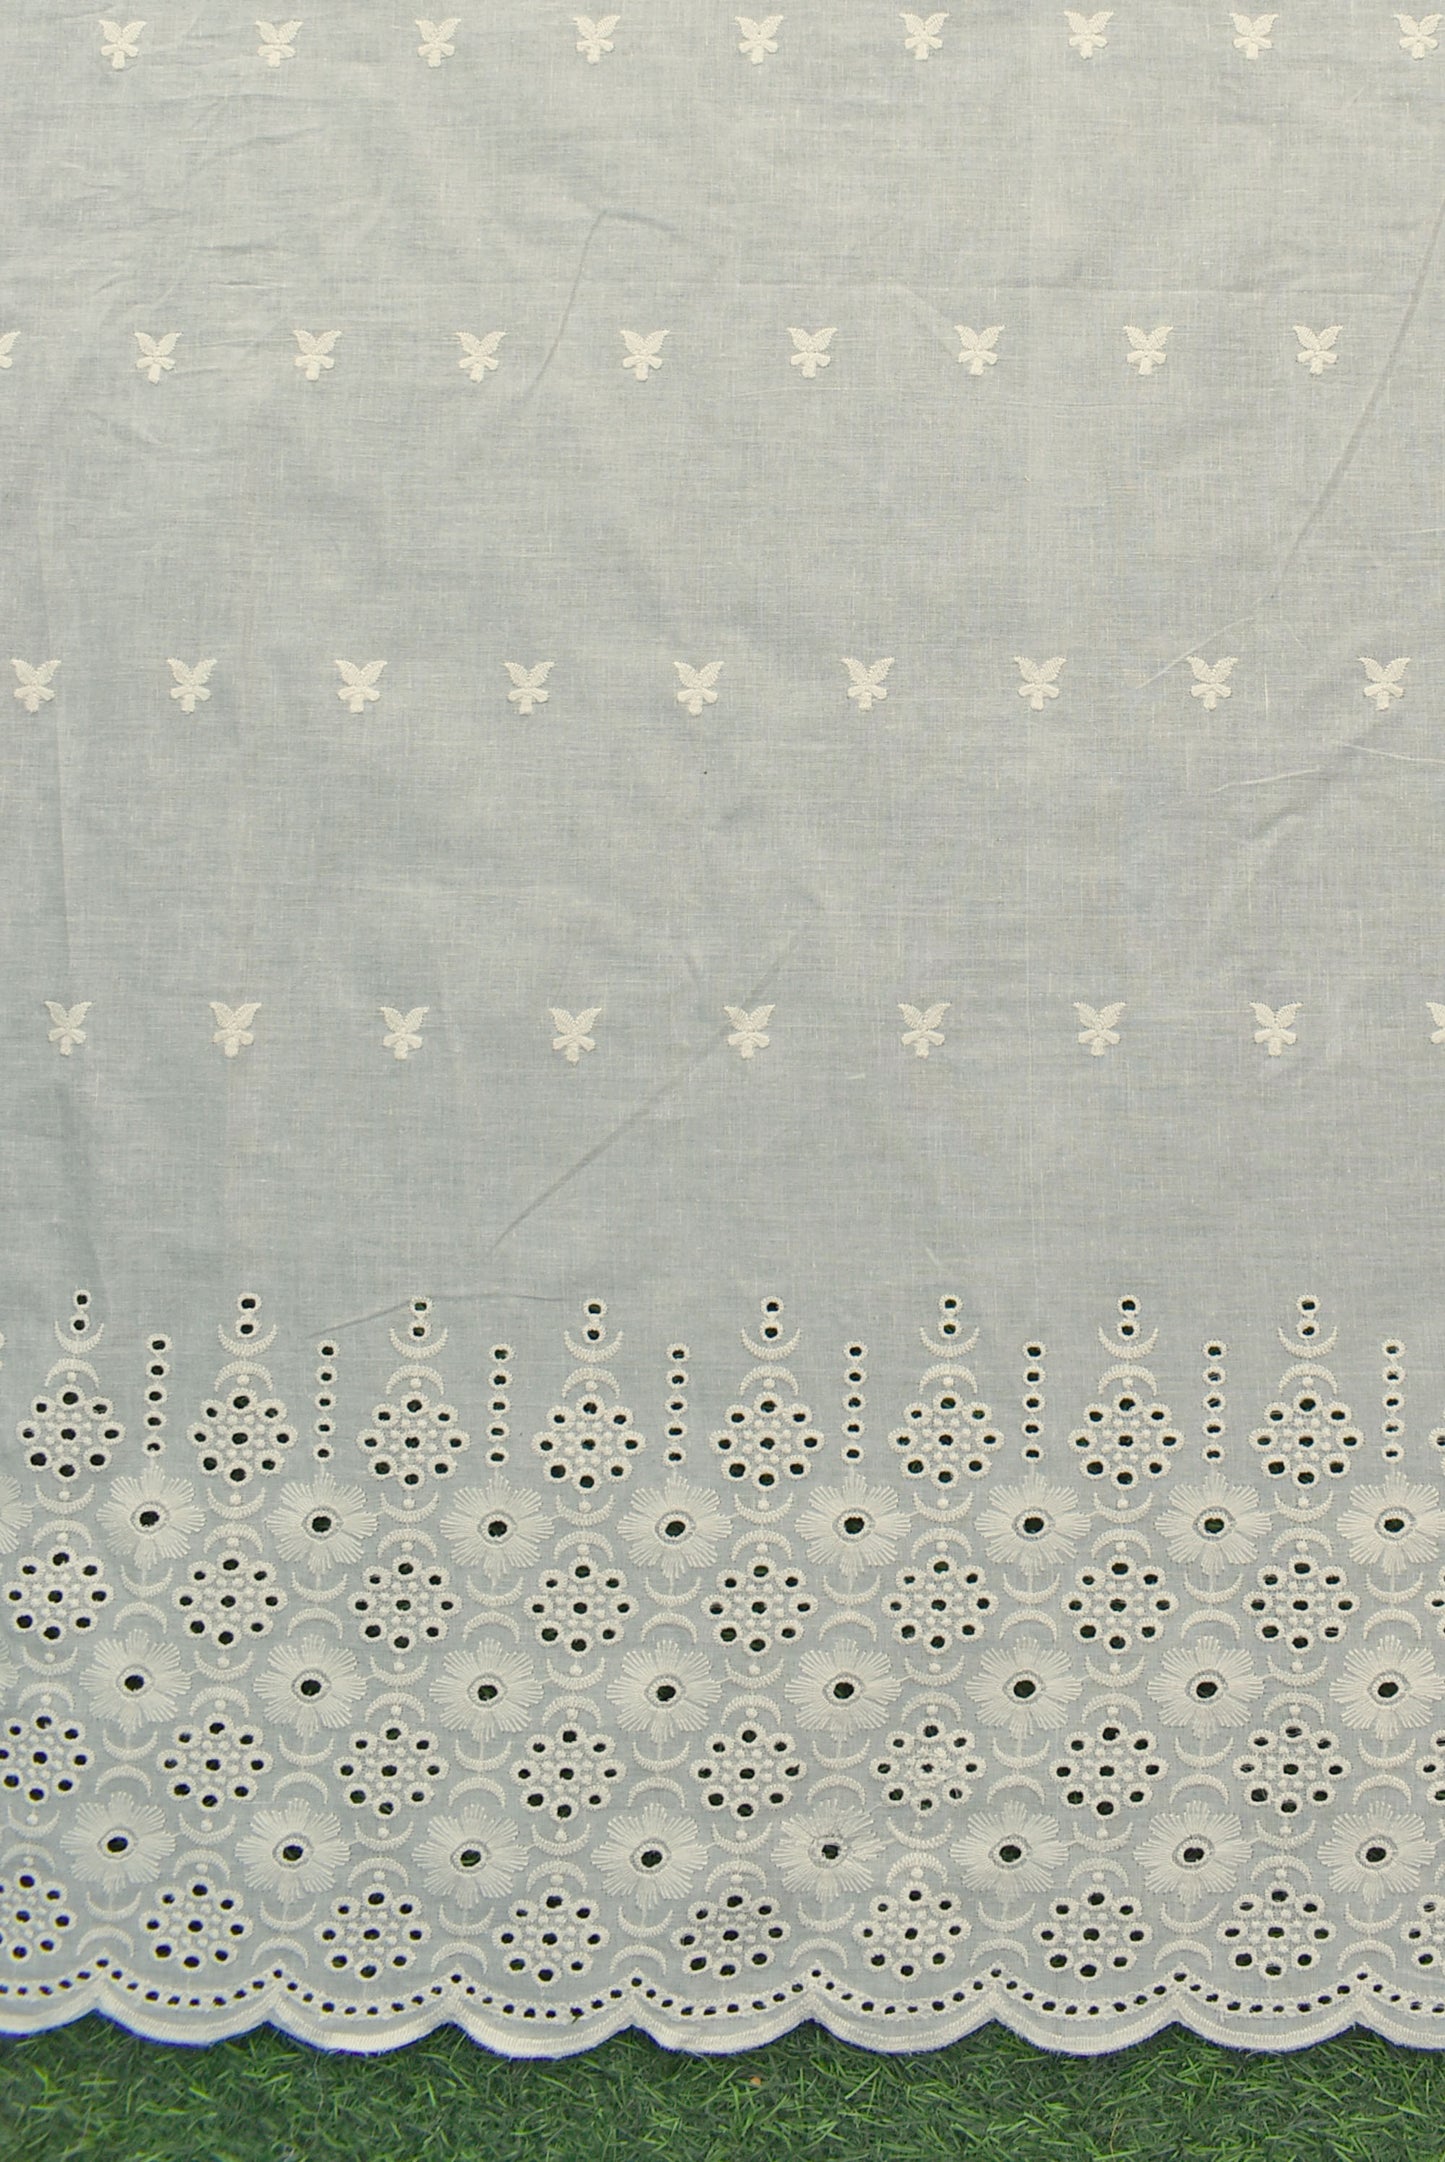 Beautiful cotton fabric with schiffli work & embroidery - 2.5 mtrs - color dark cream - dyeable